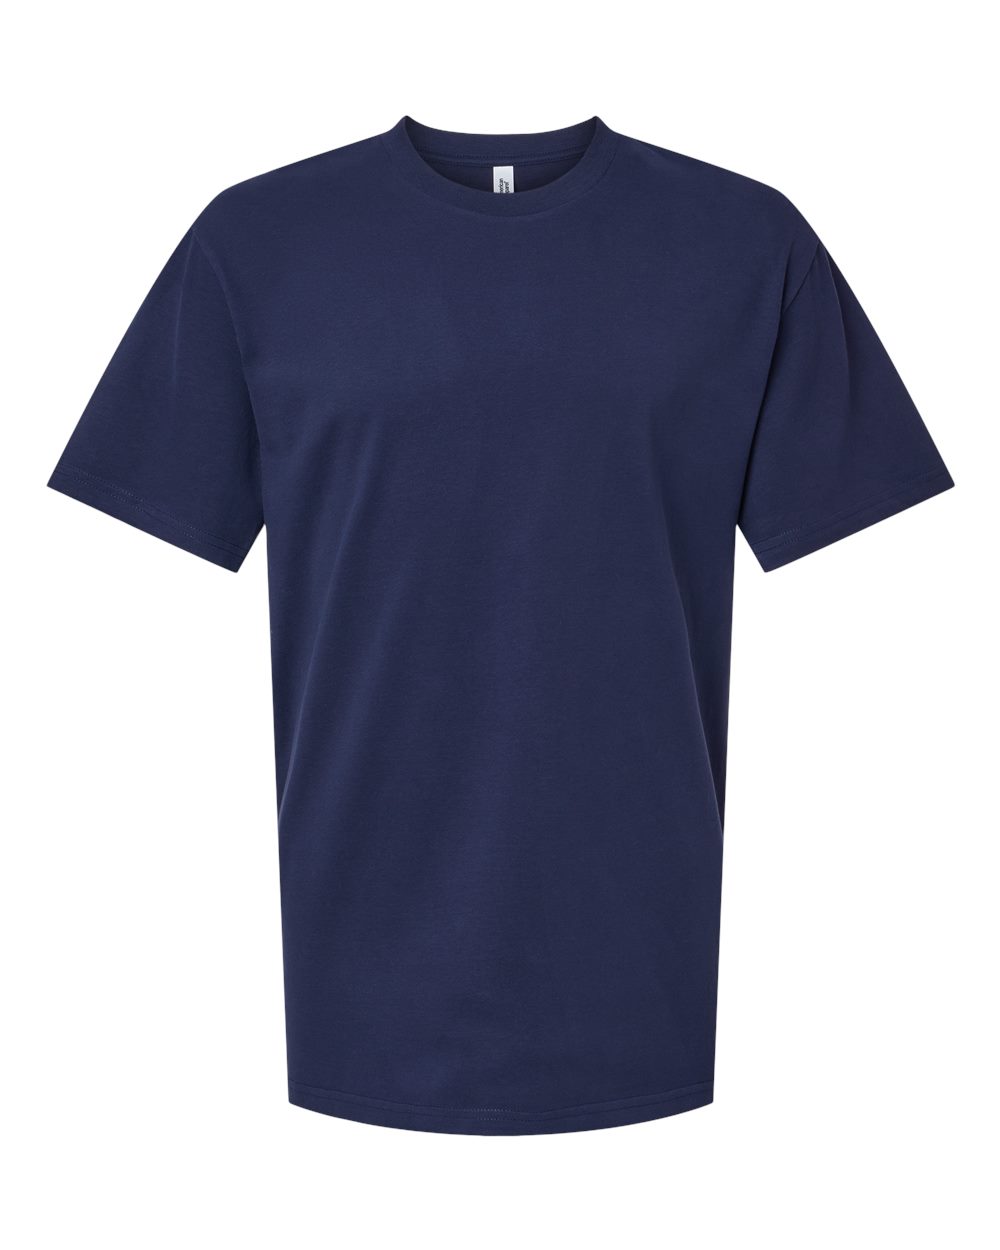 click to view Sueded Navy